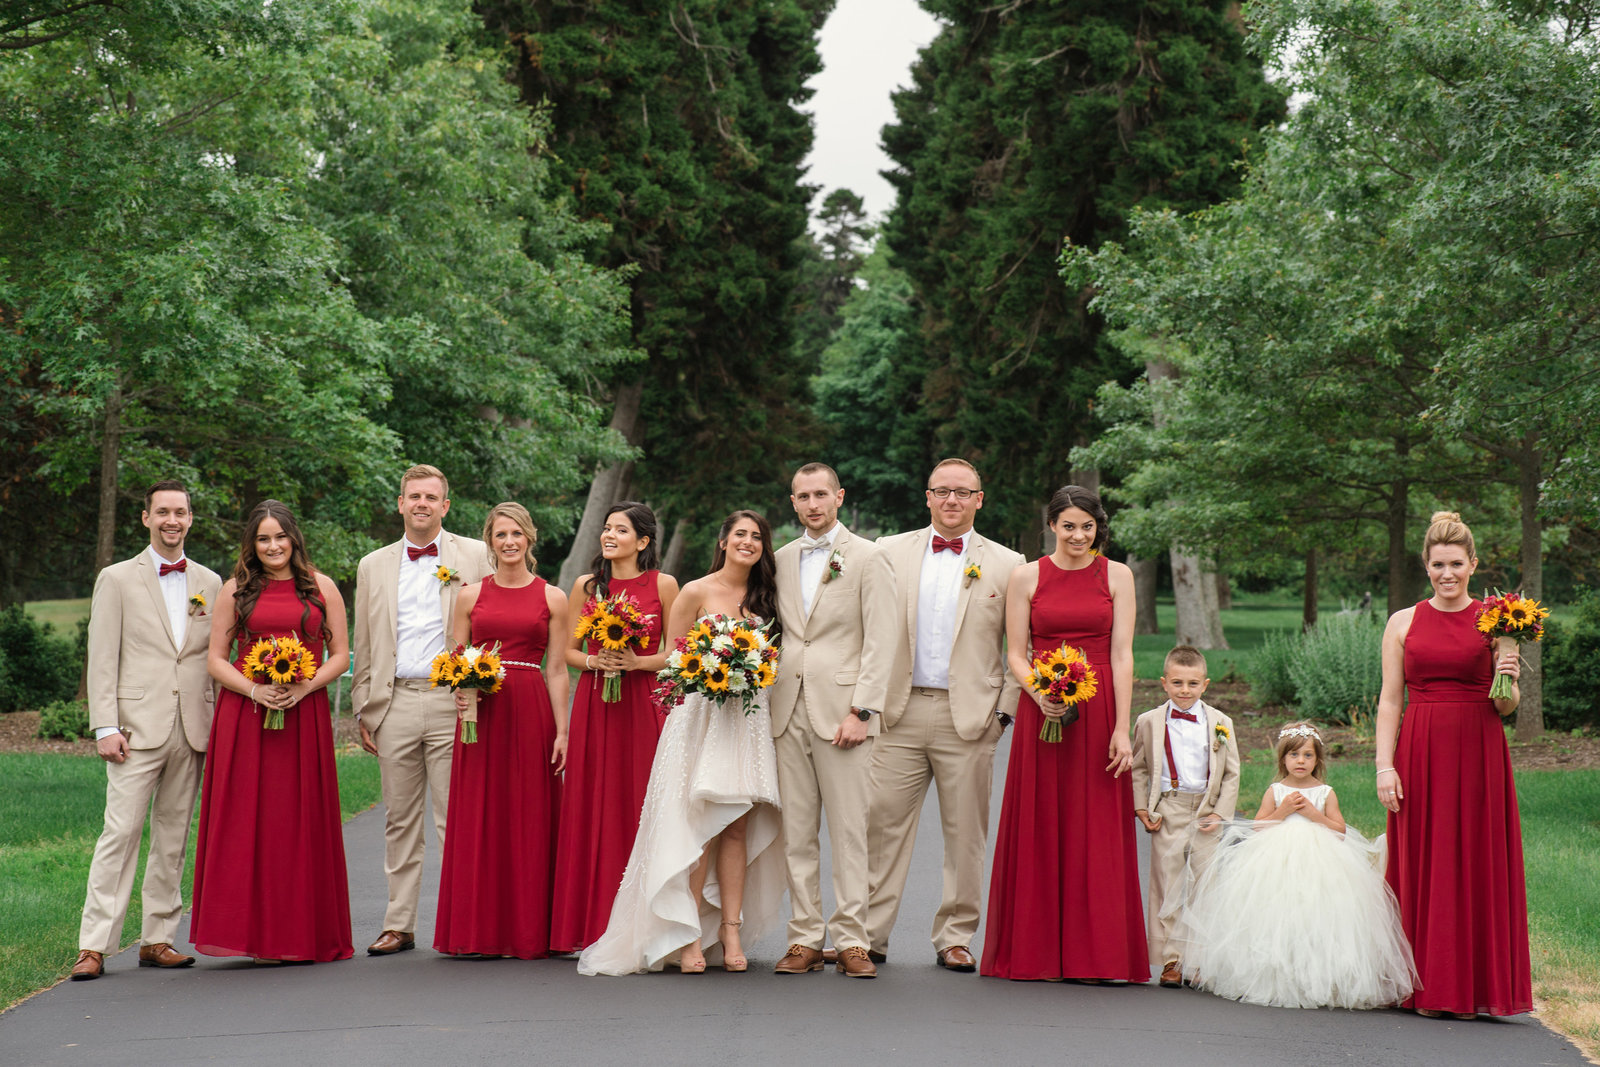 Bridal party photo at the main road of the Bourne Mansion